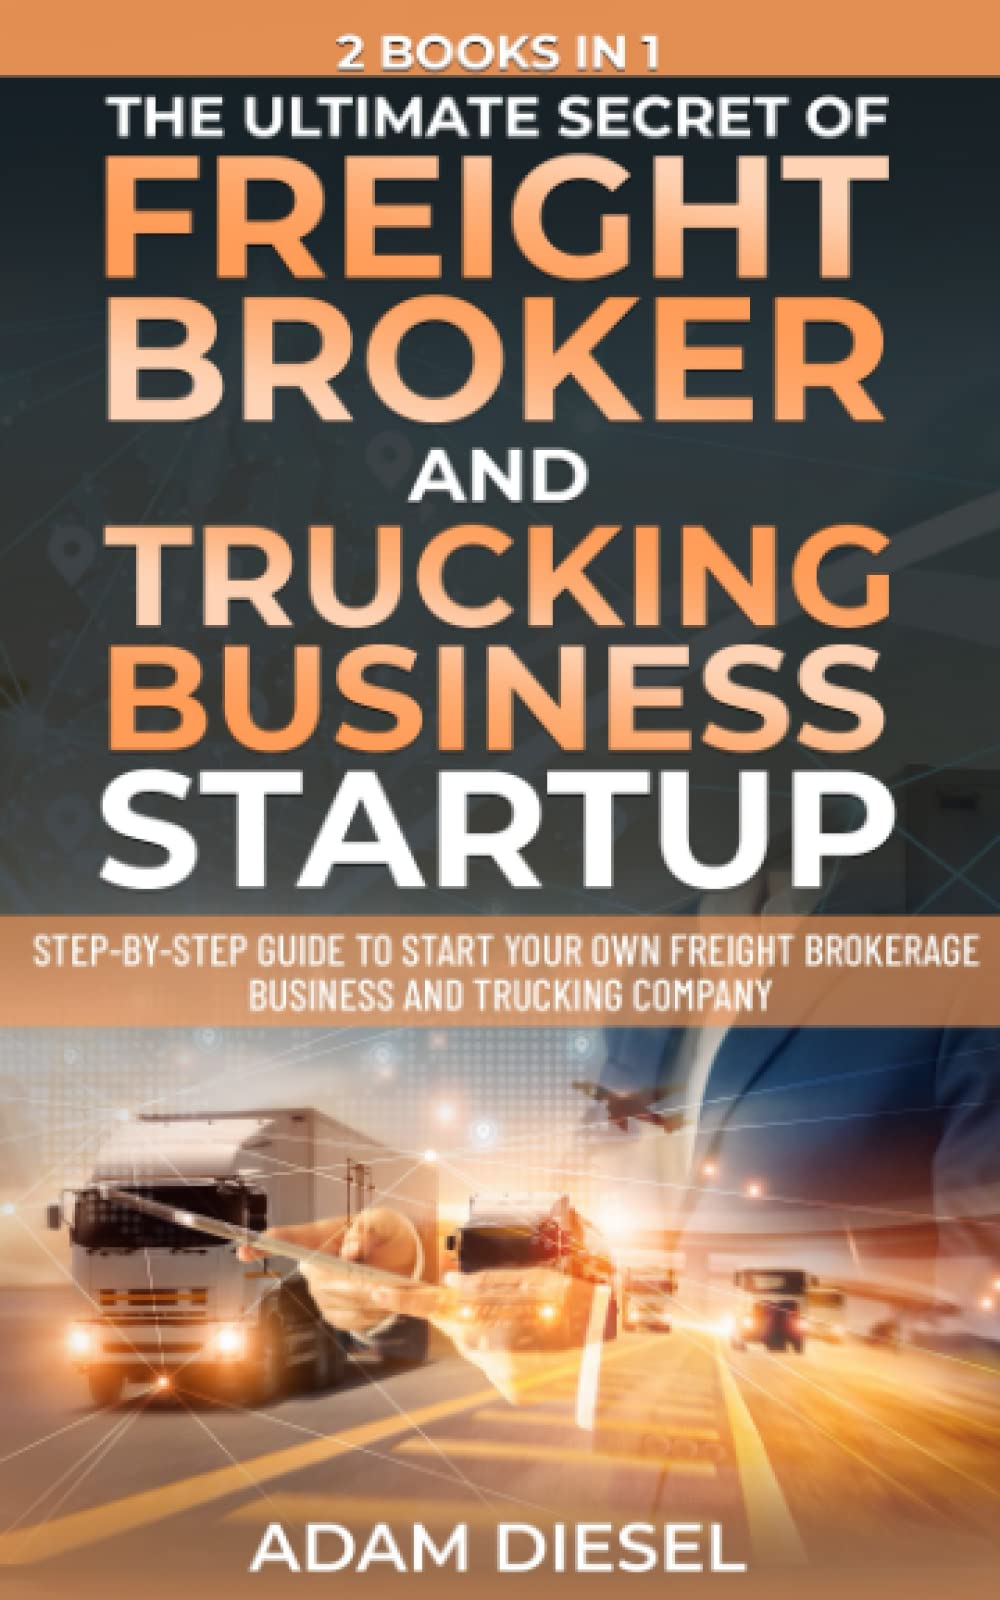 The Ultimate Secret Of FREIGHT BROKER AND TRUCKING BUSINESS STARTUP- 2 Books in 1:Step-by-Step Guide to Start your own Freight Brokerage Business and Trucking Company